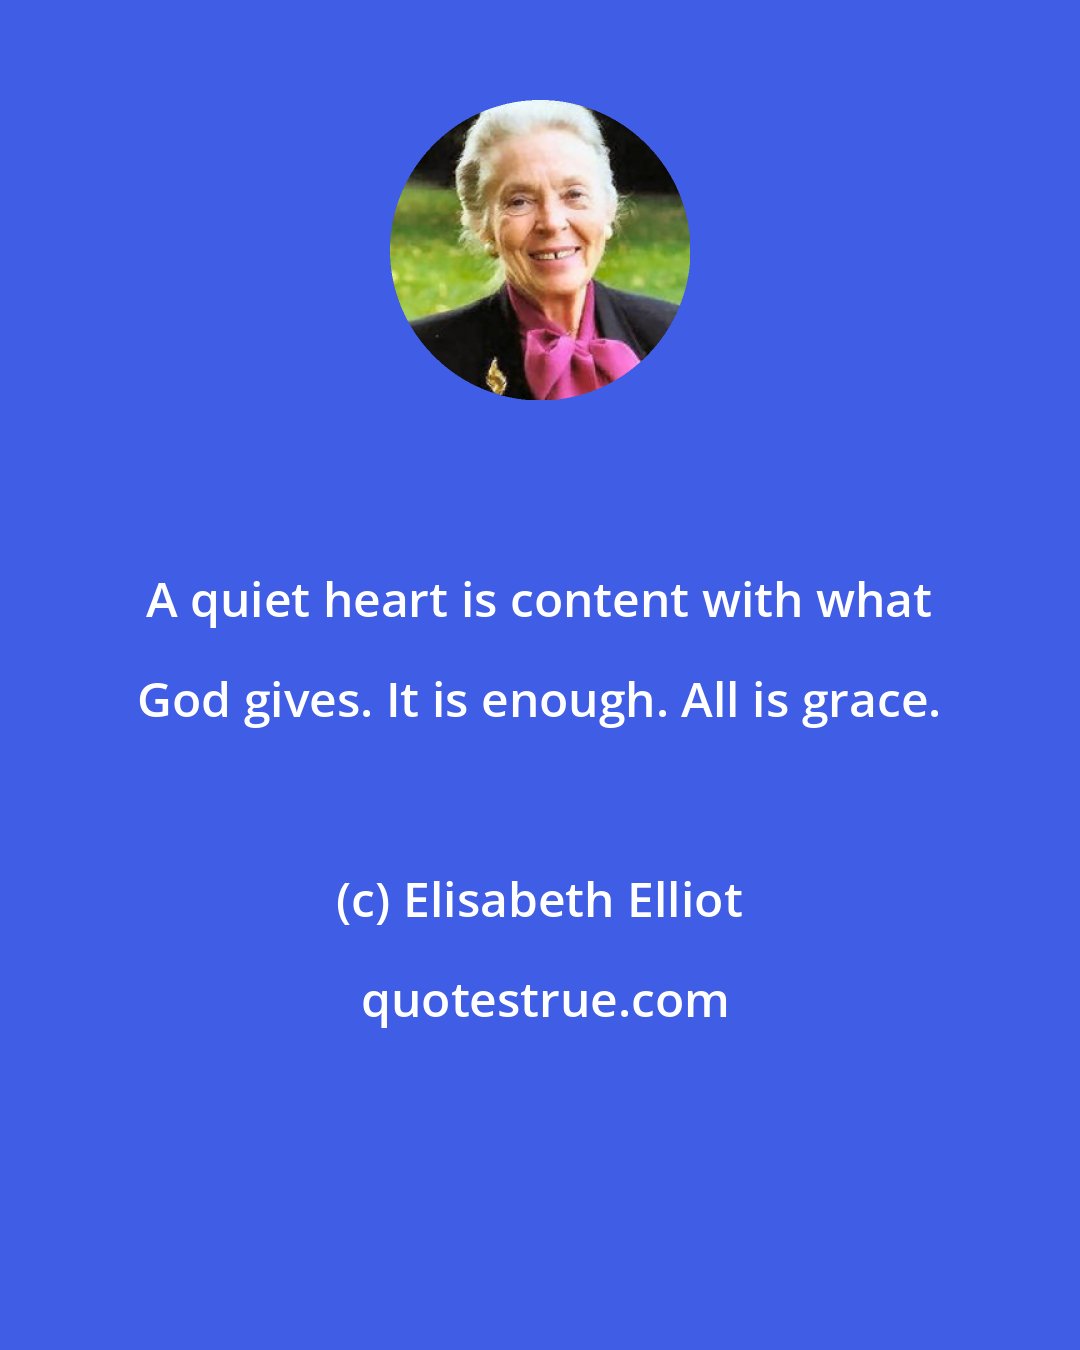 Elisabeth Elliot: A quiet heart is content with what God gives. It is enough. All is grace.